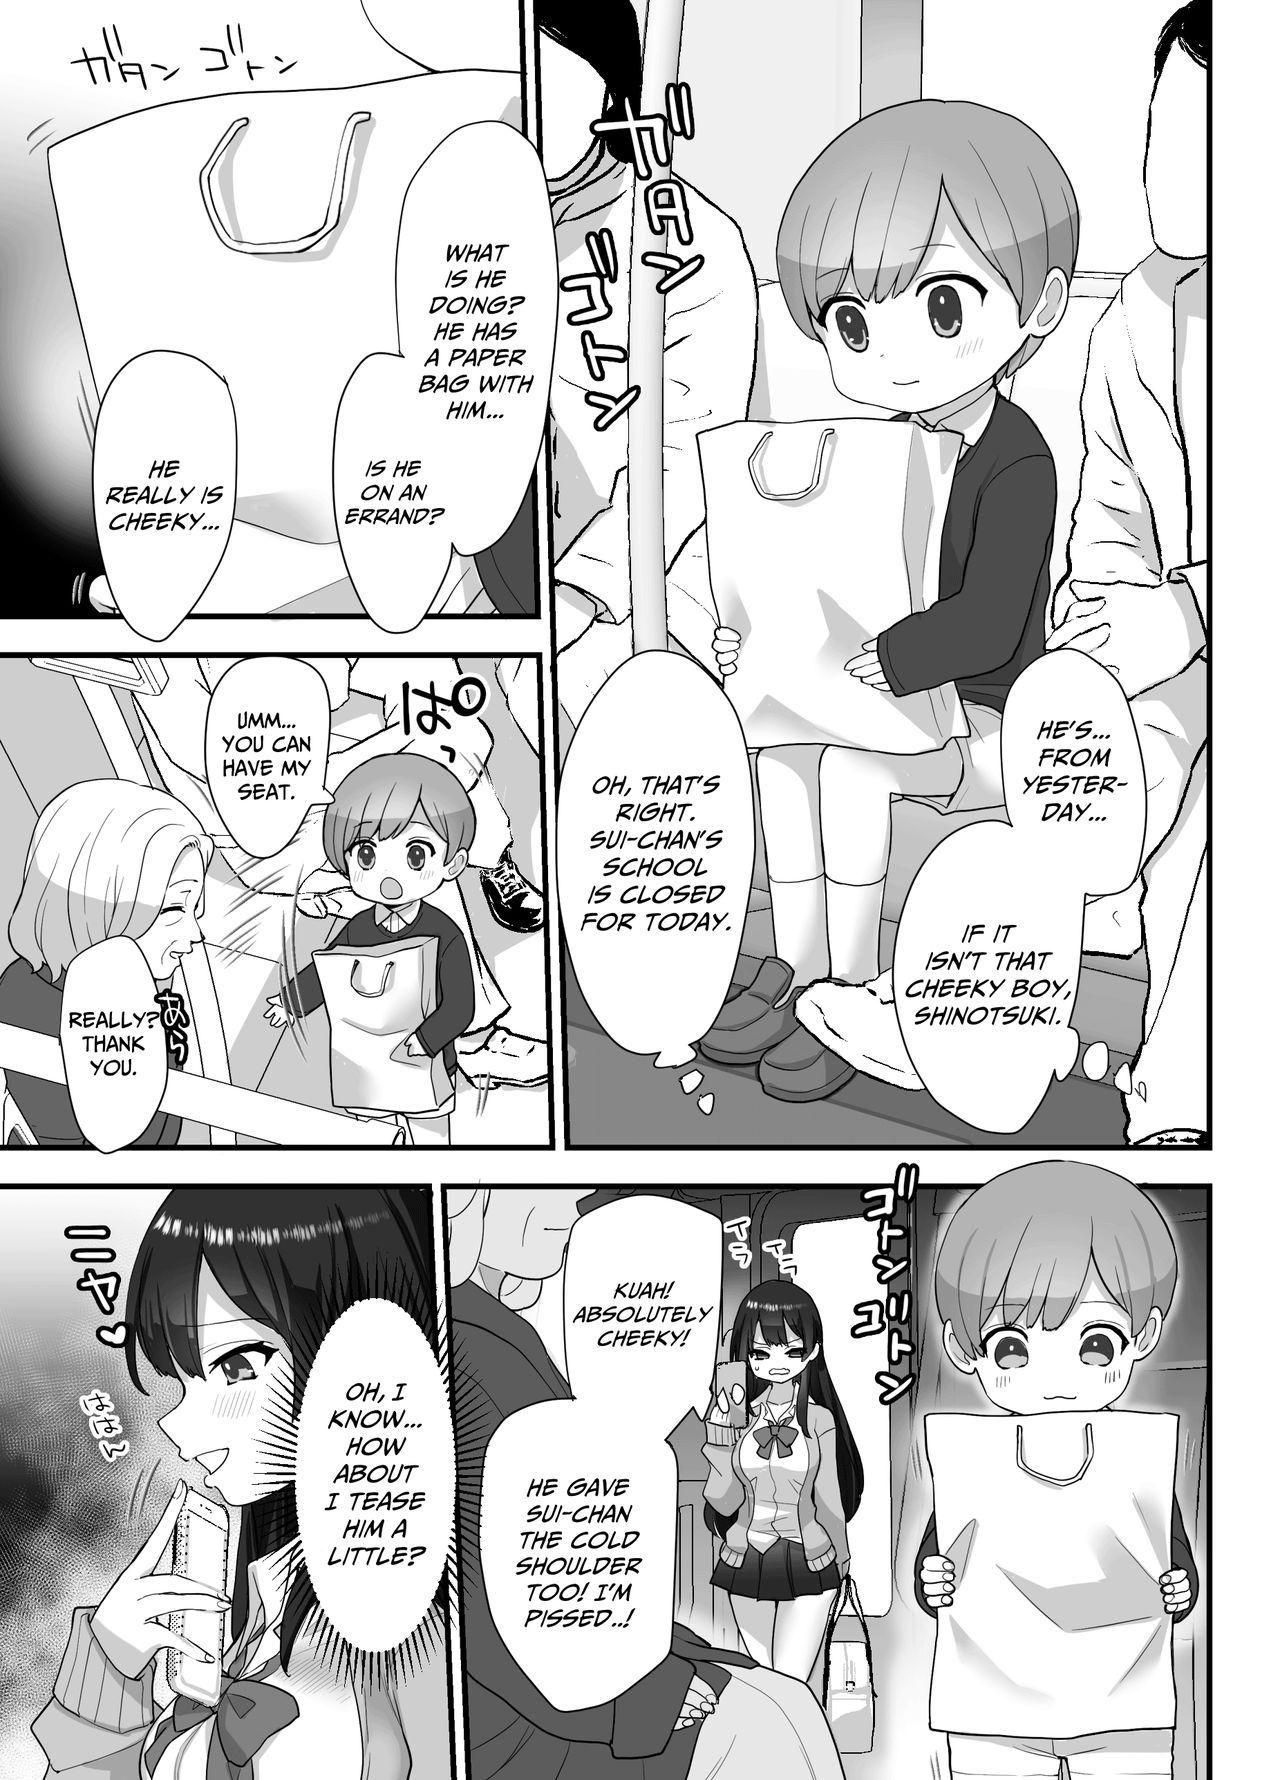 [Naporitan] Nukarumi ~ Ijimetagari JK To Seishounen ~ | Quagmire ~The High School Girl Who Loves To Bully and The Pure Young Boy~ [English] [CulturedCommissions] 7